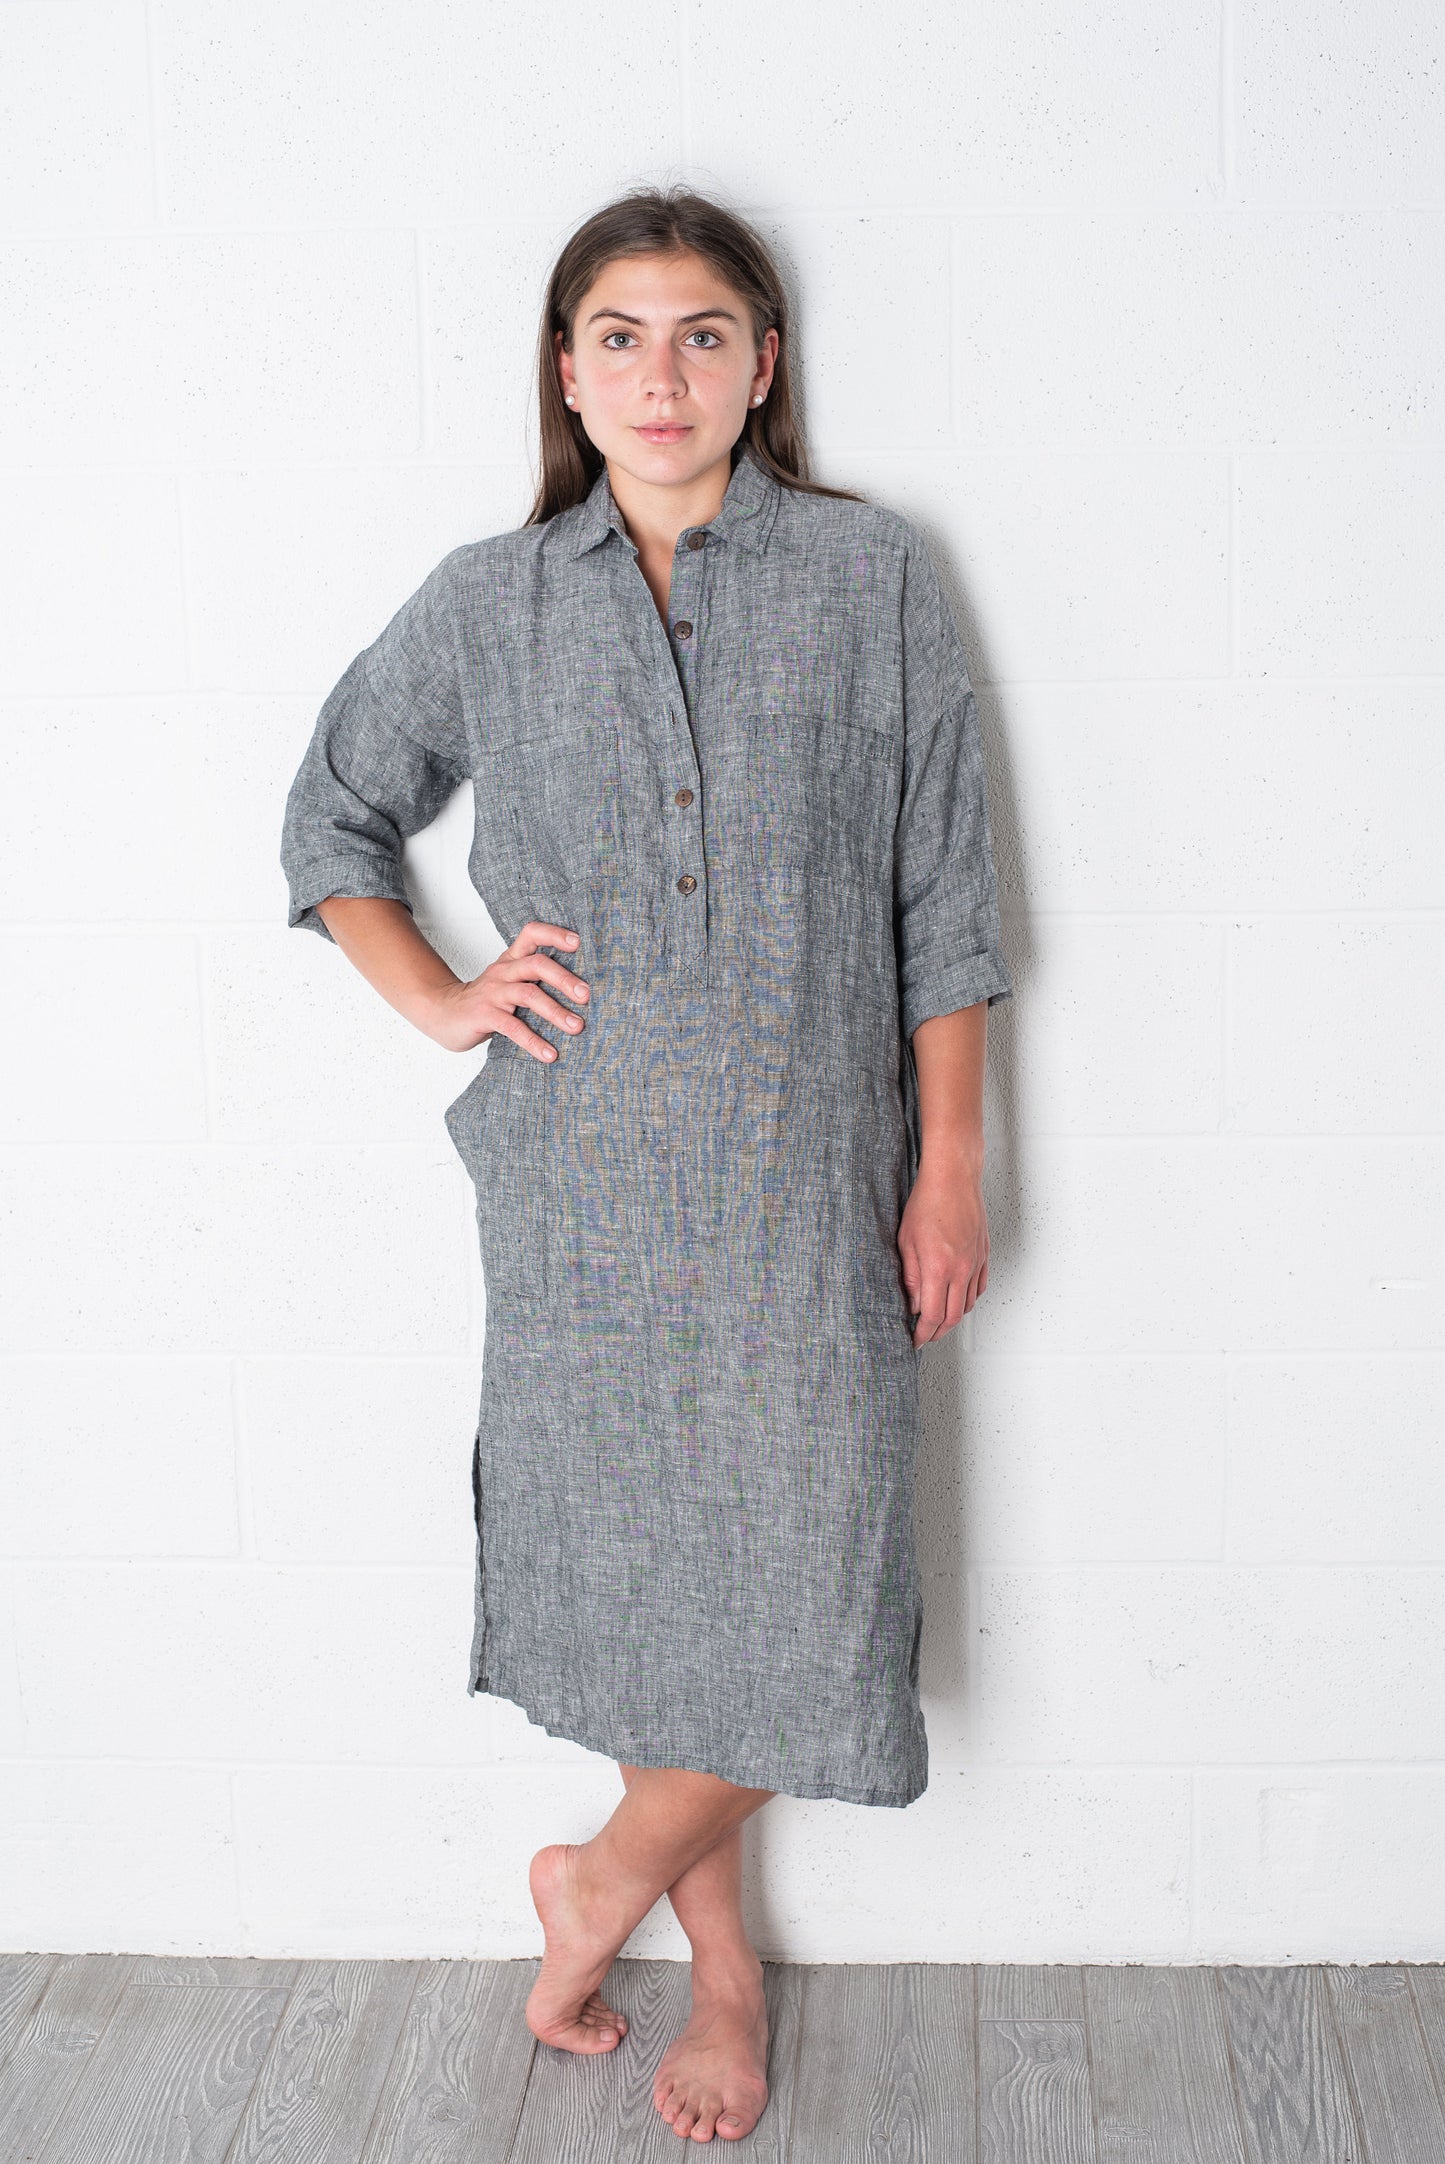 Chic and relaxed: Woman in a medium-weight linen midi dress.